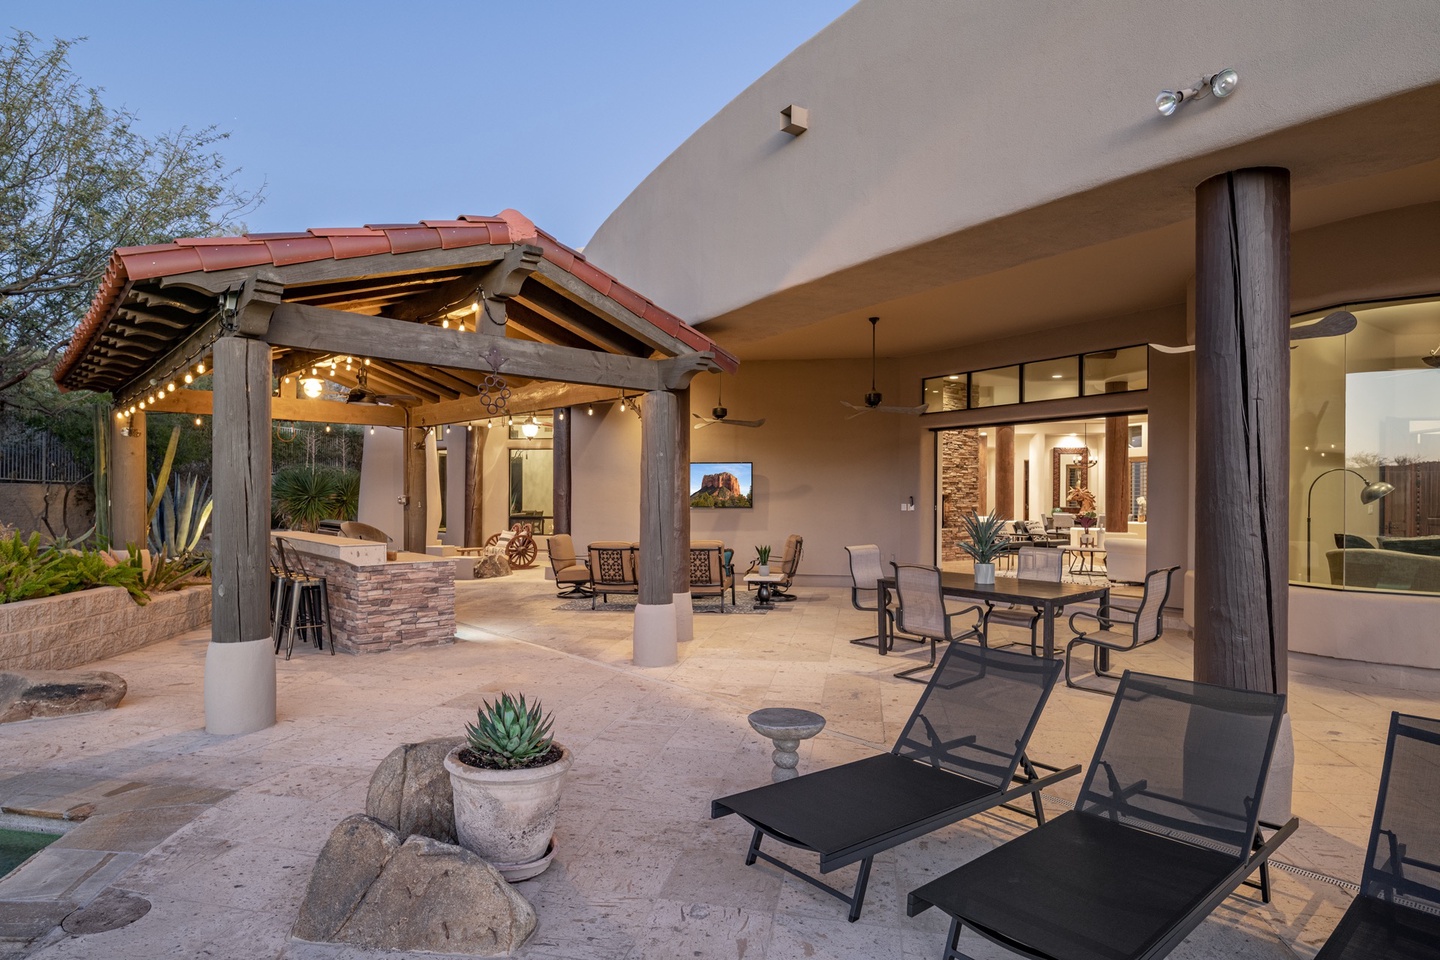 Large covered patio with outdoor TV and plenty of seating